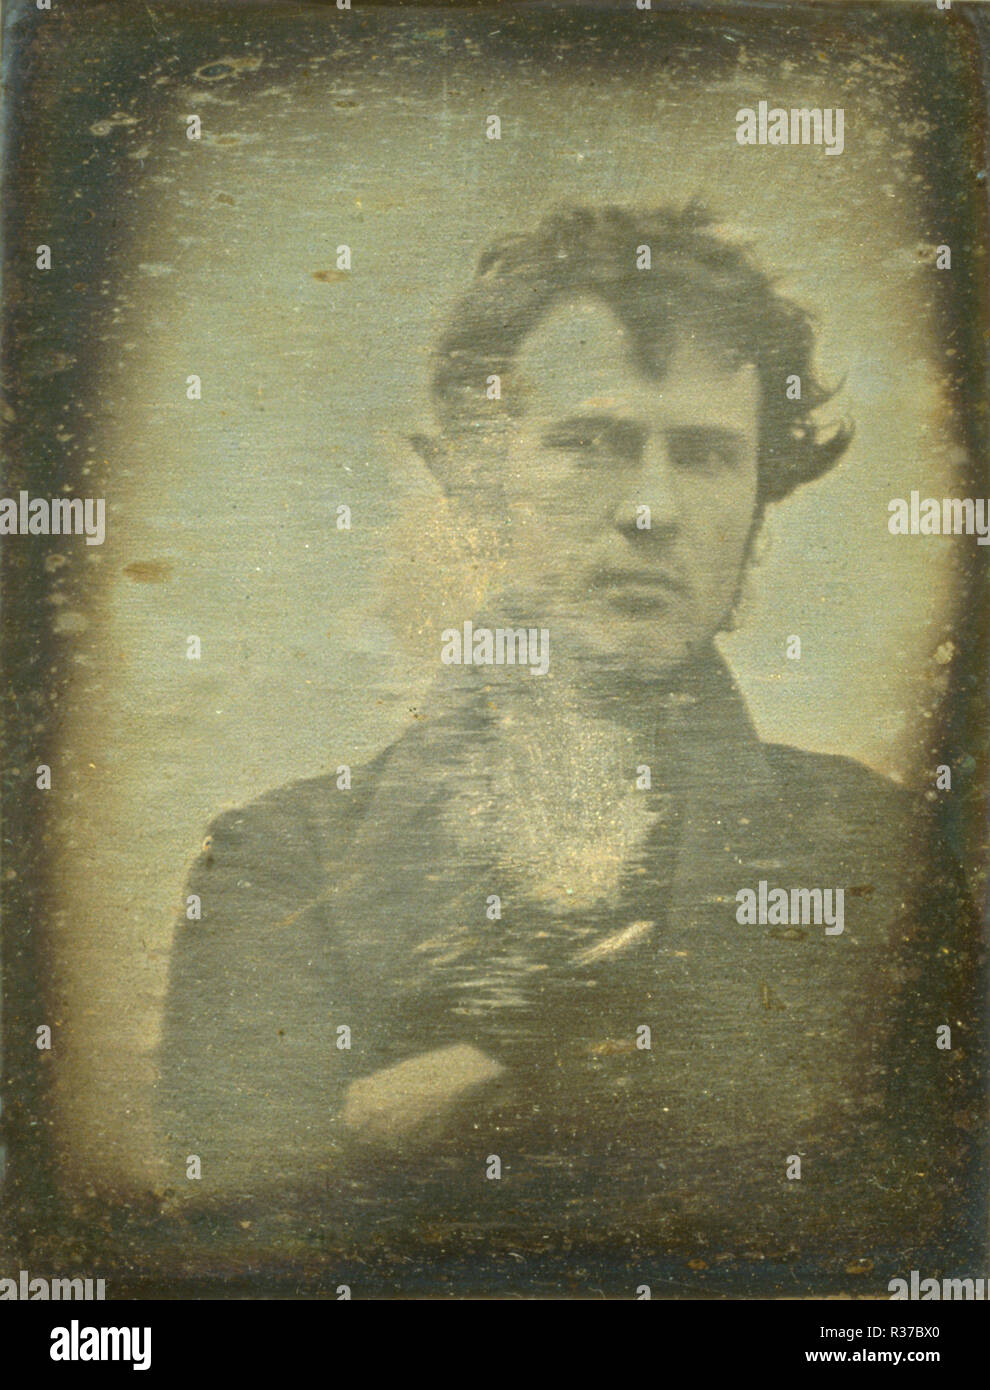 The first photographic portrait image of a human ever produced. Robert Cornelius, self-portrait Stock Photo